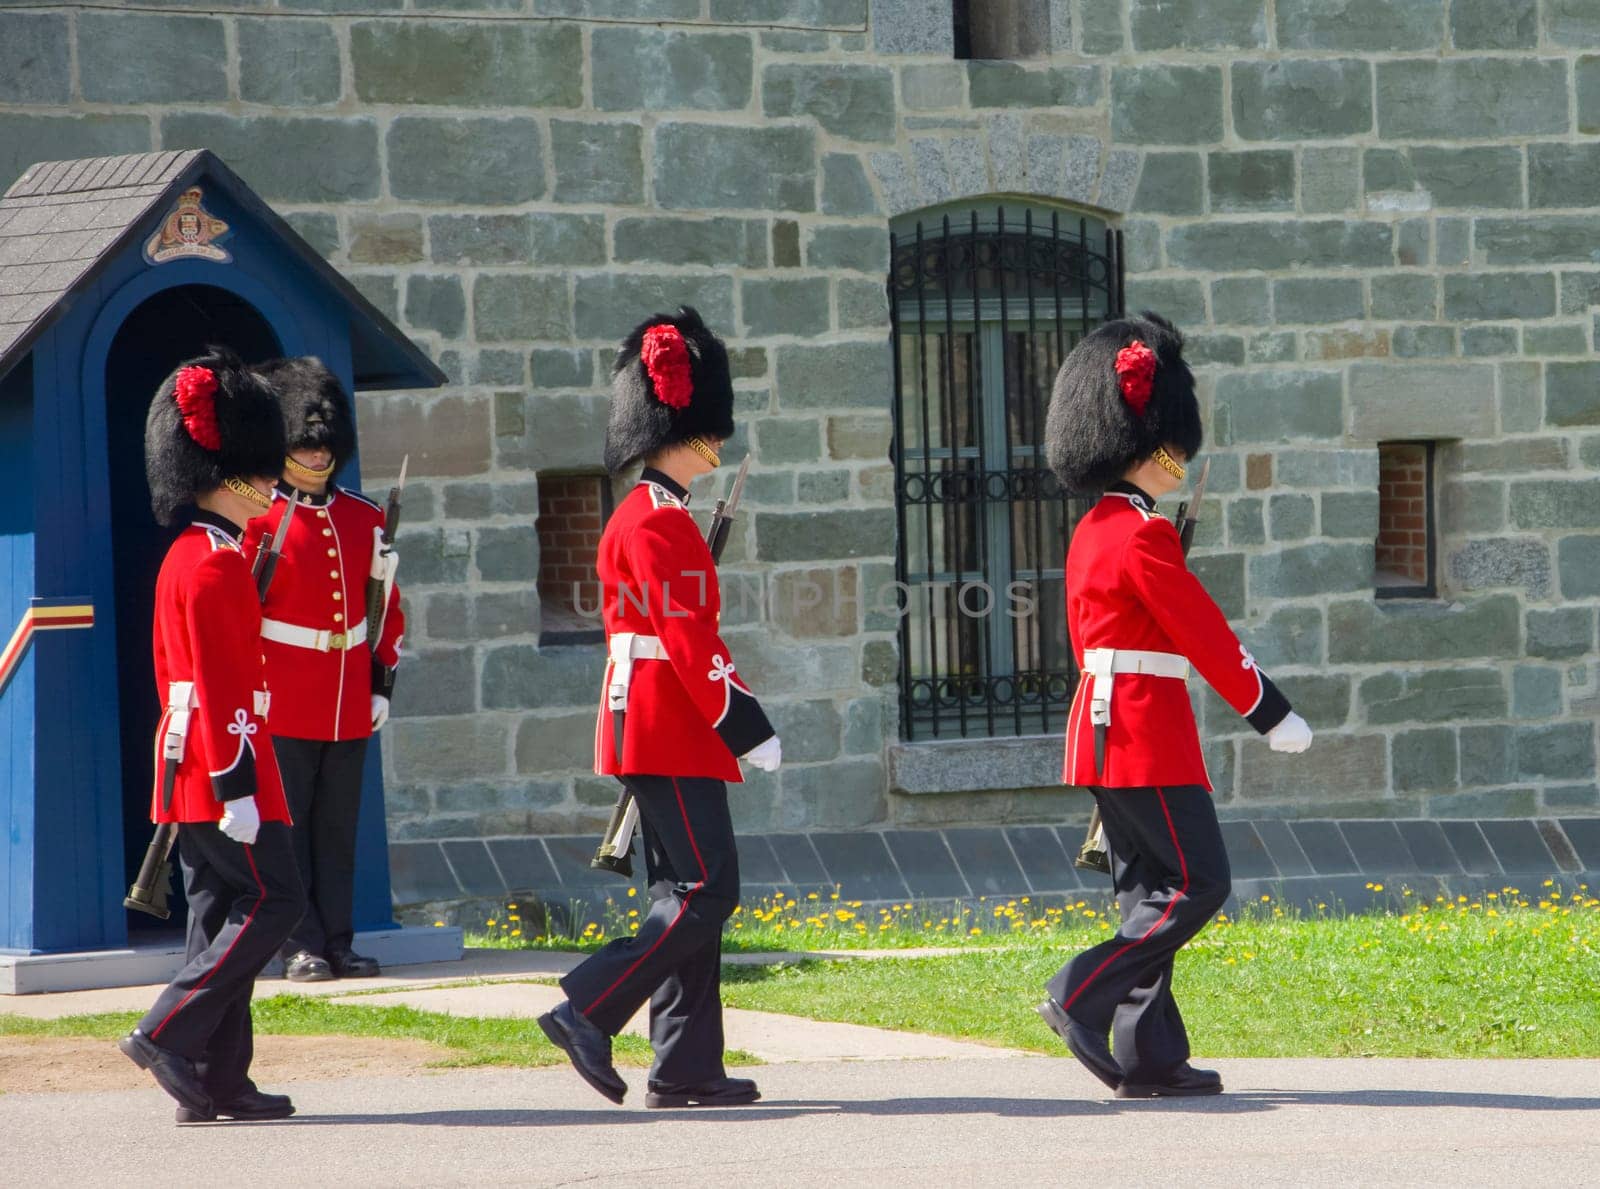 QUEBEC, CANADA - AUGUST 20, 2014: The members of the Canadian Royal 22nd Regiment by Godi